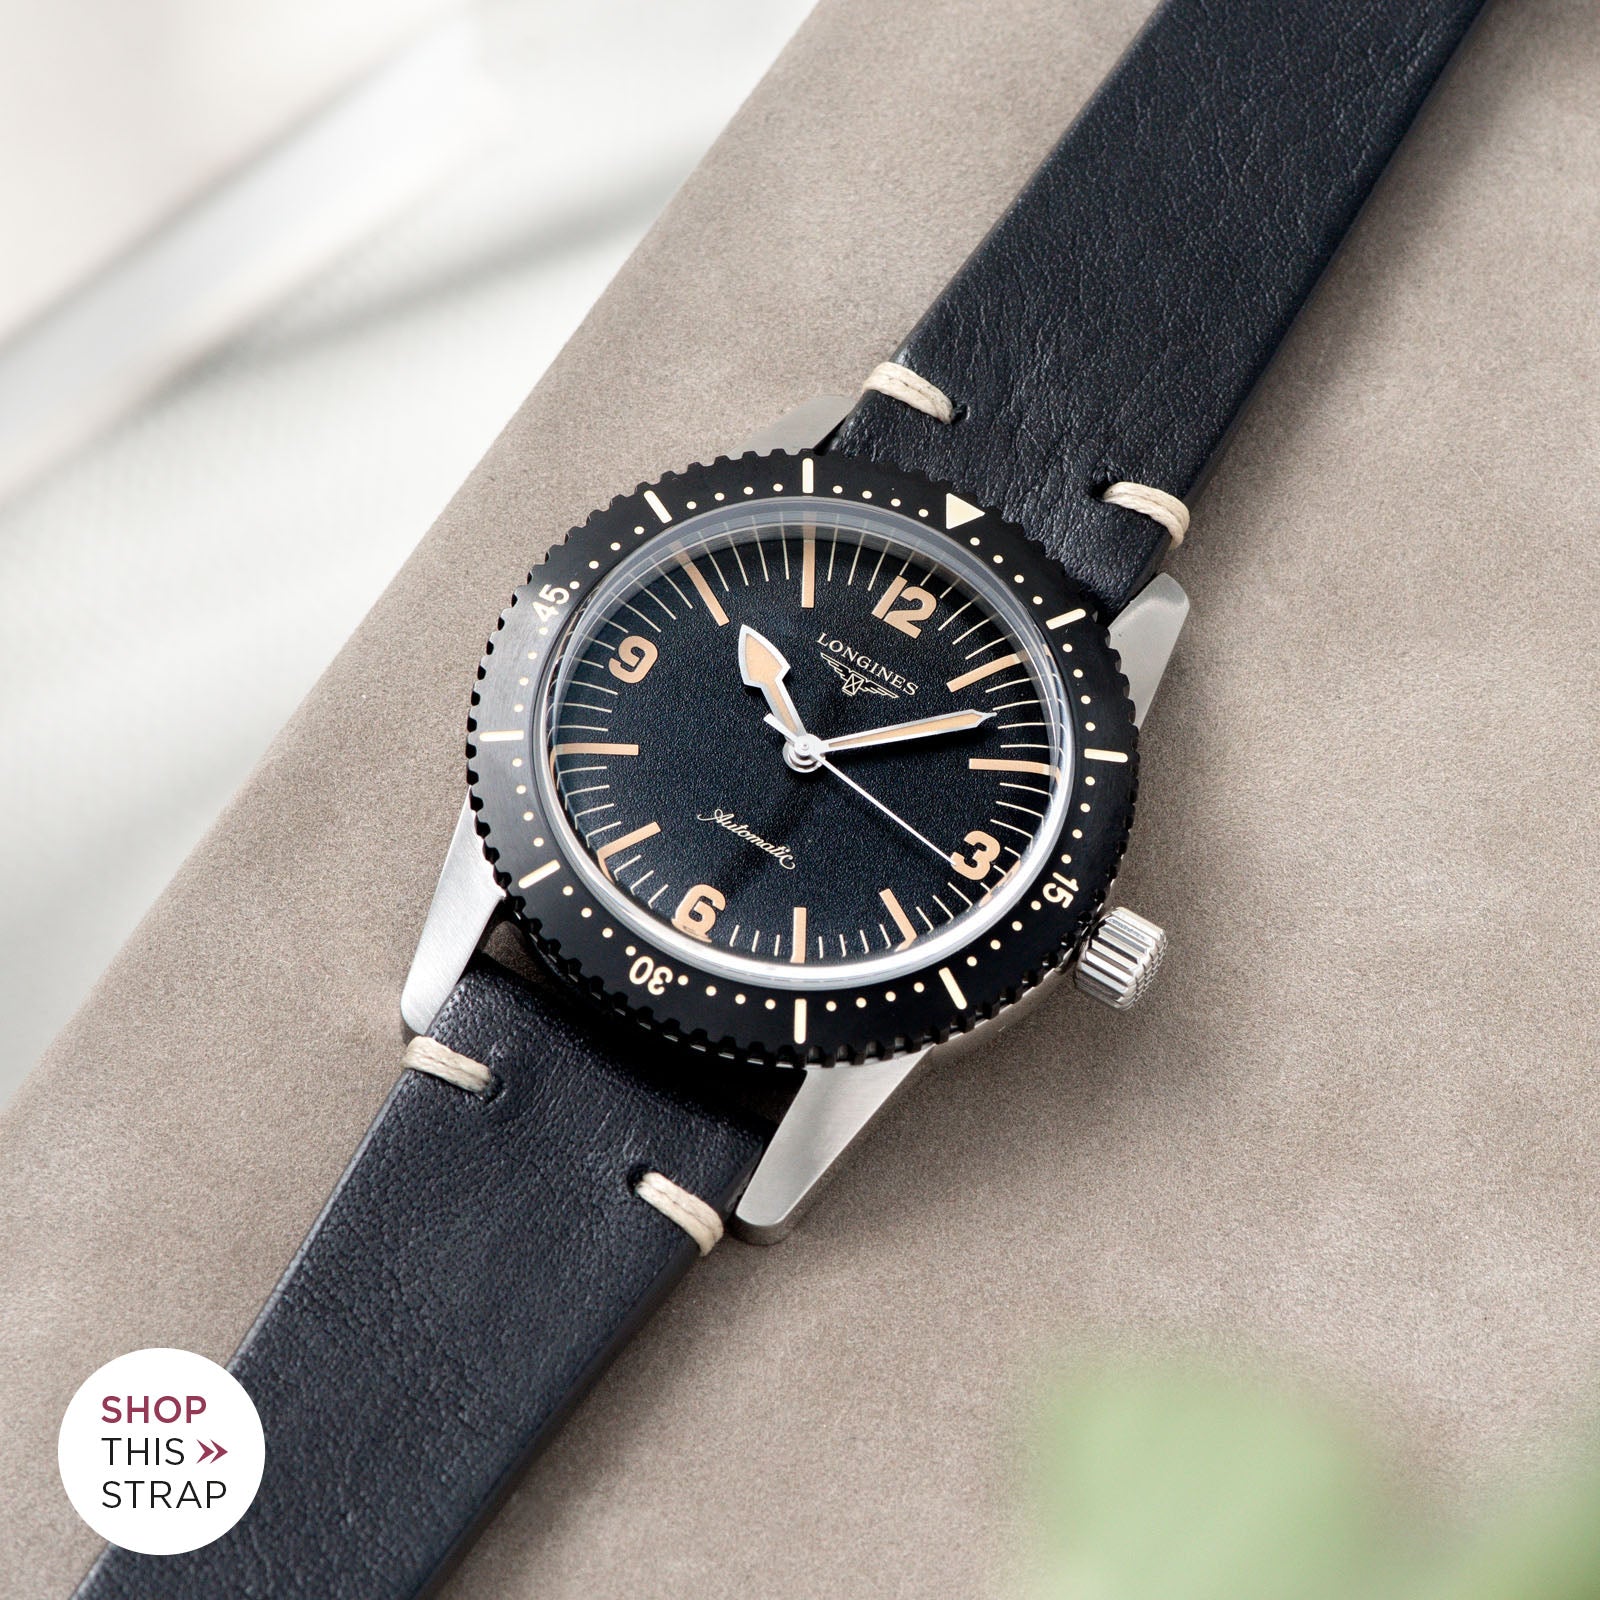 Bulang and Sons_Strap Guide_Longines Skin Diver_Black Leather Watch Strap